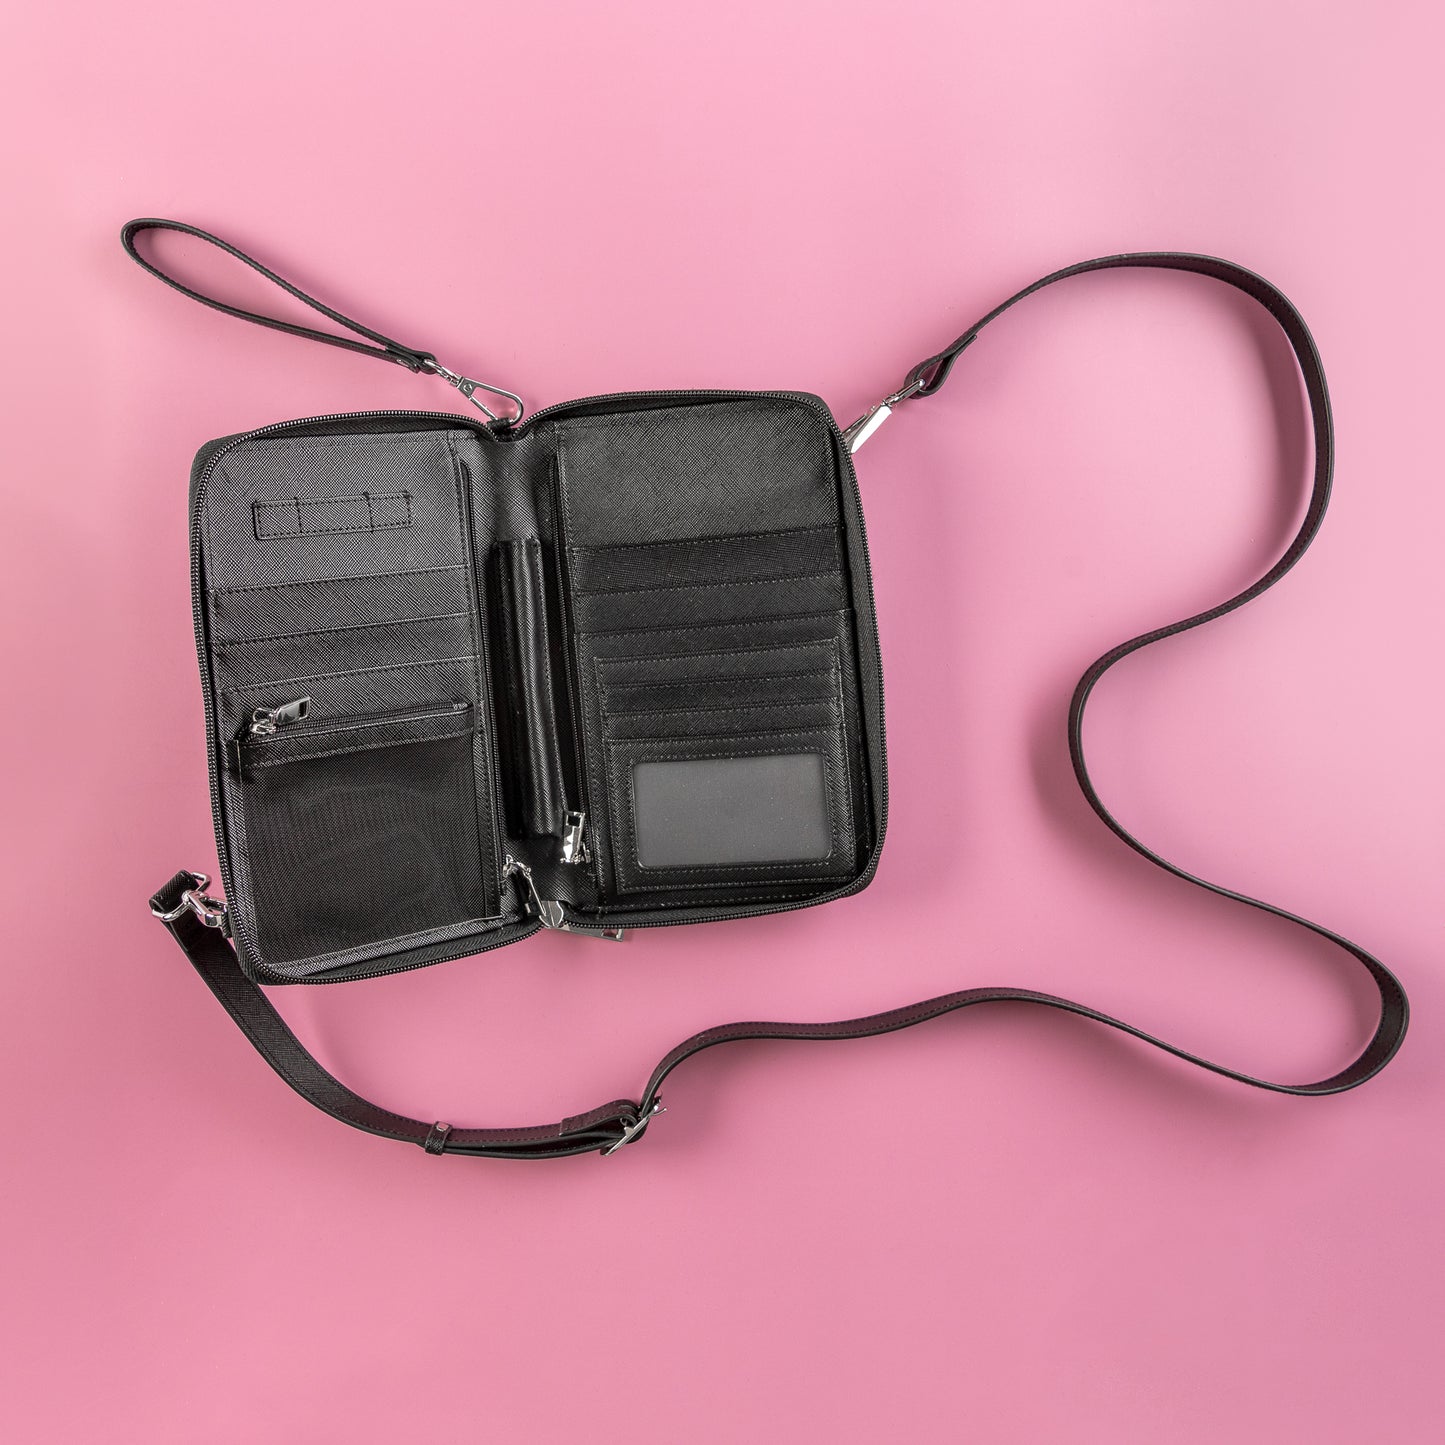 black passport wallet with wrist and bag strap on a pink background showing plenty of room for pen, sim cards, passports, boarding passes, cash & cards